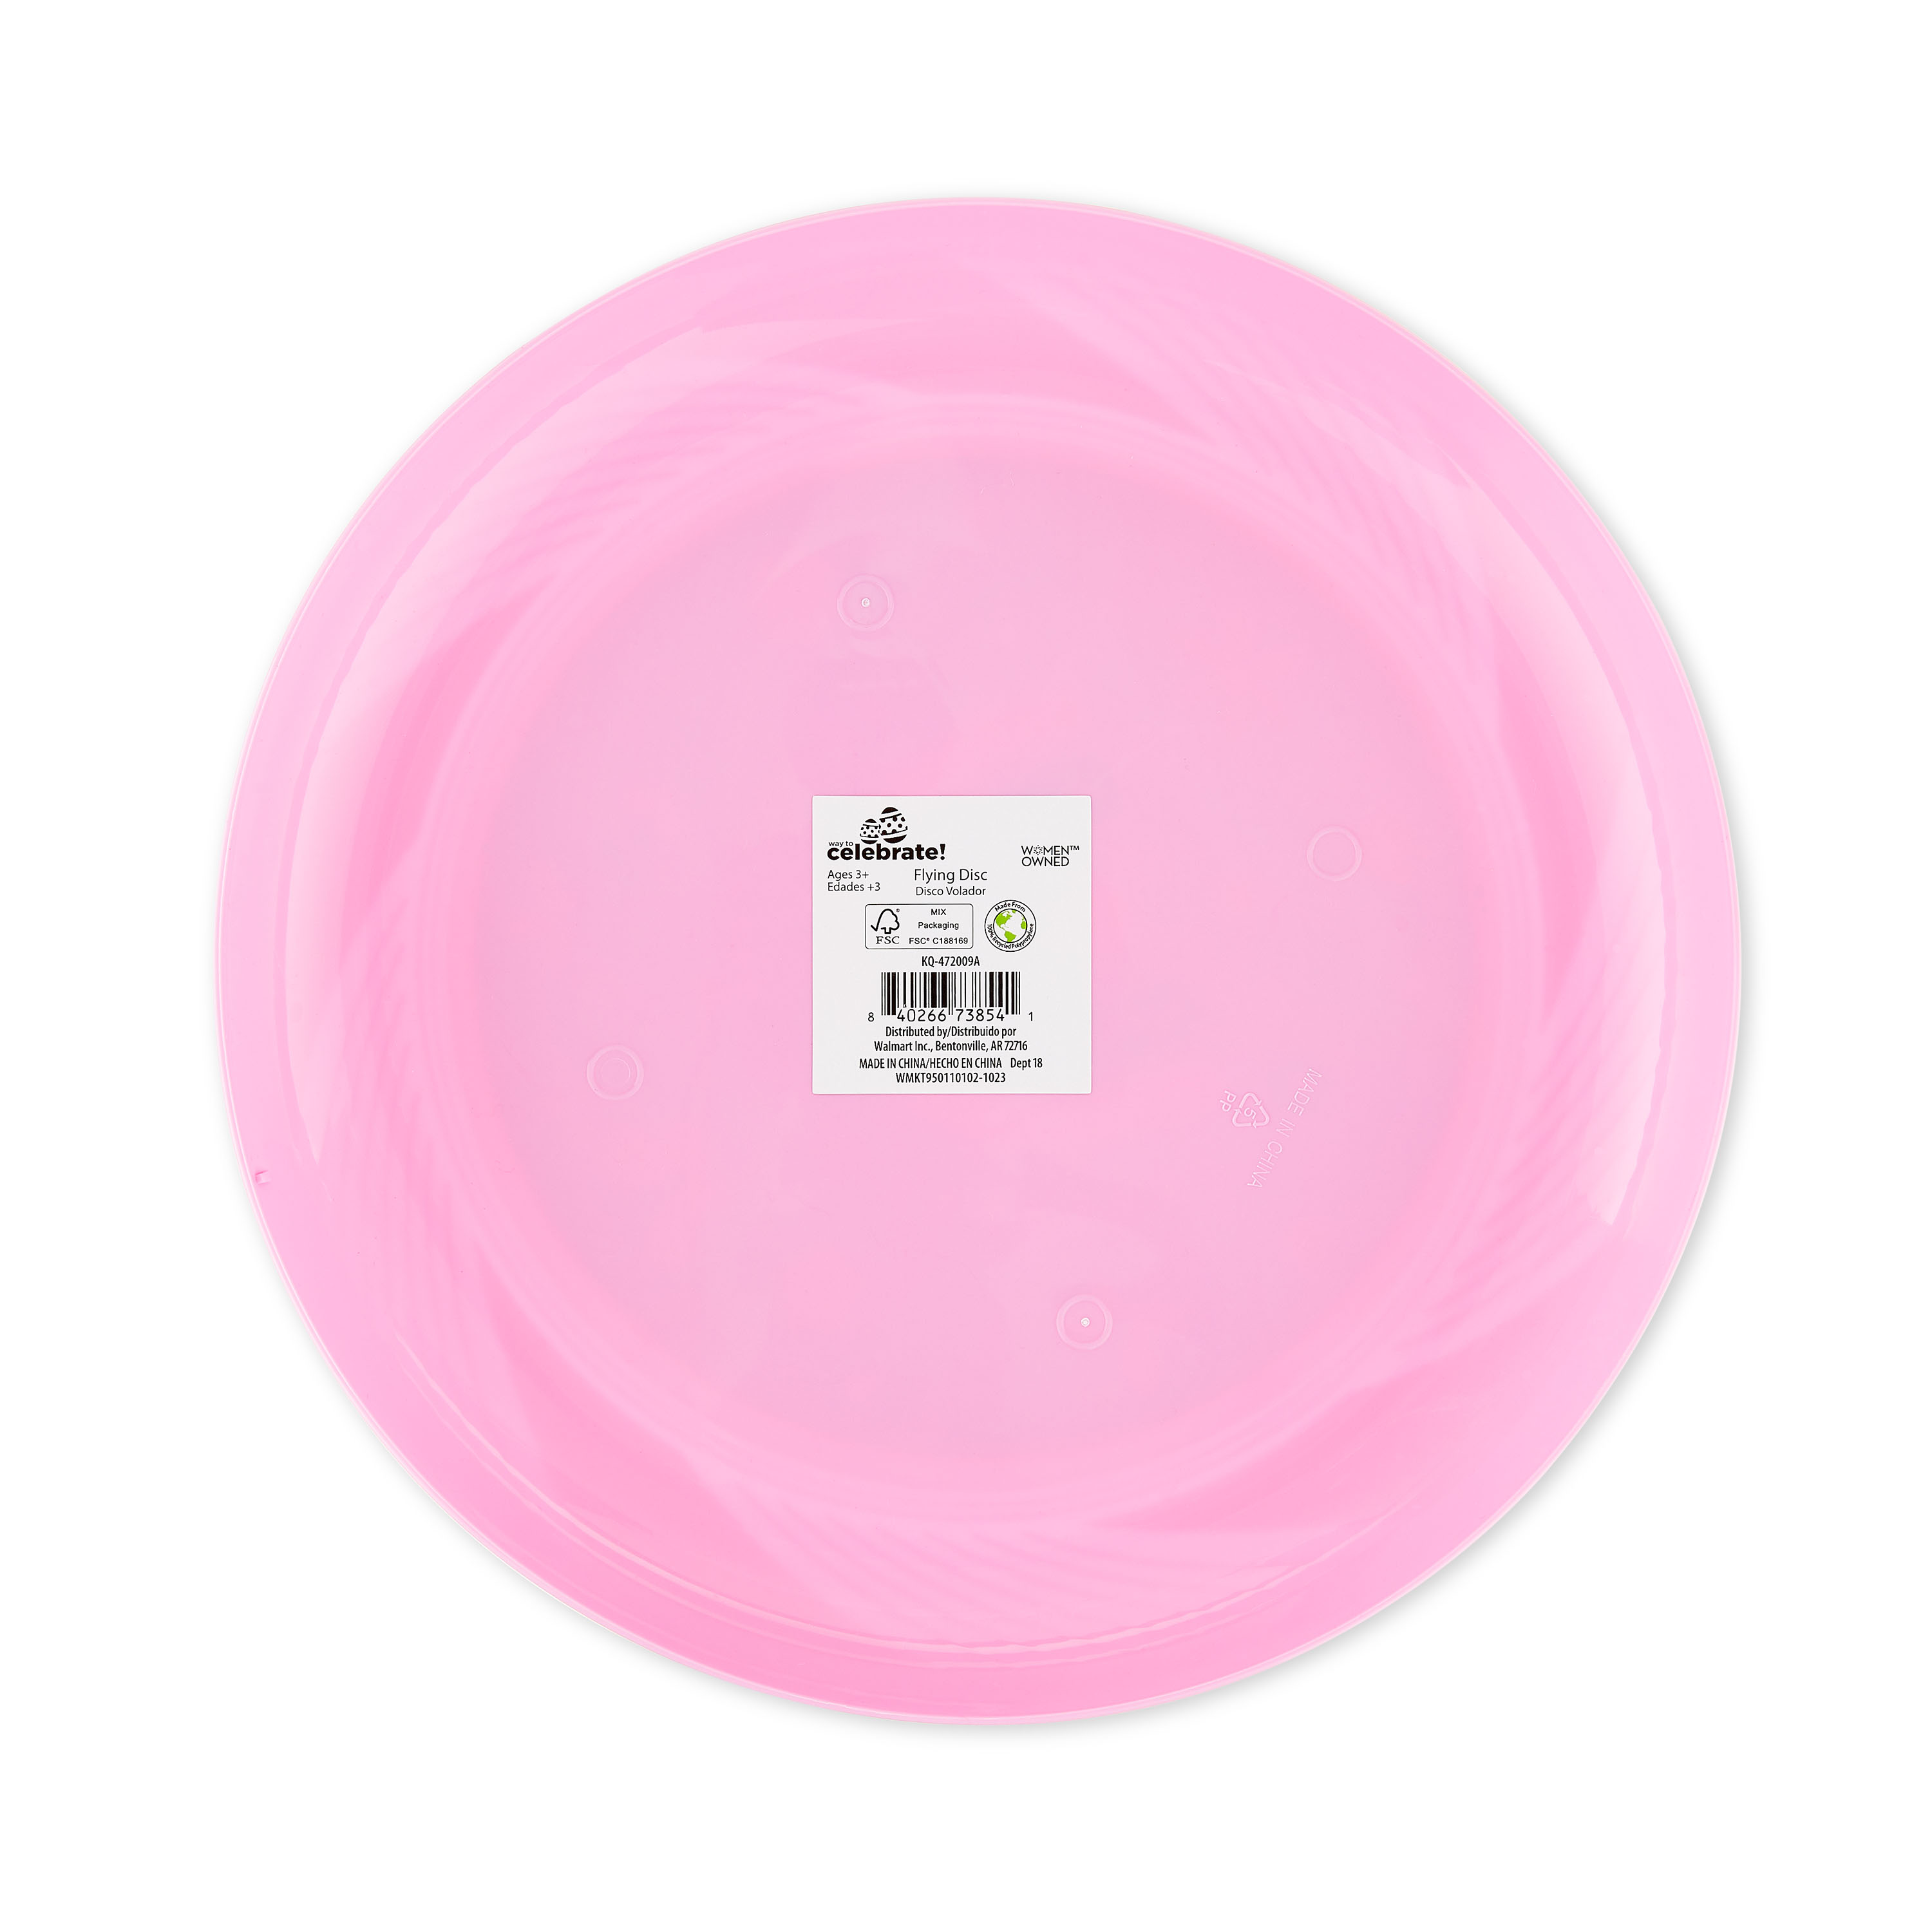 Easter Pink Rainbow Flying Disc, by Way To Celebrate - image 4 of 6